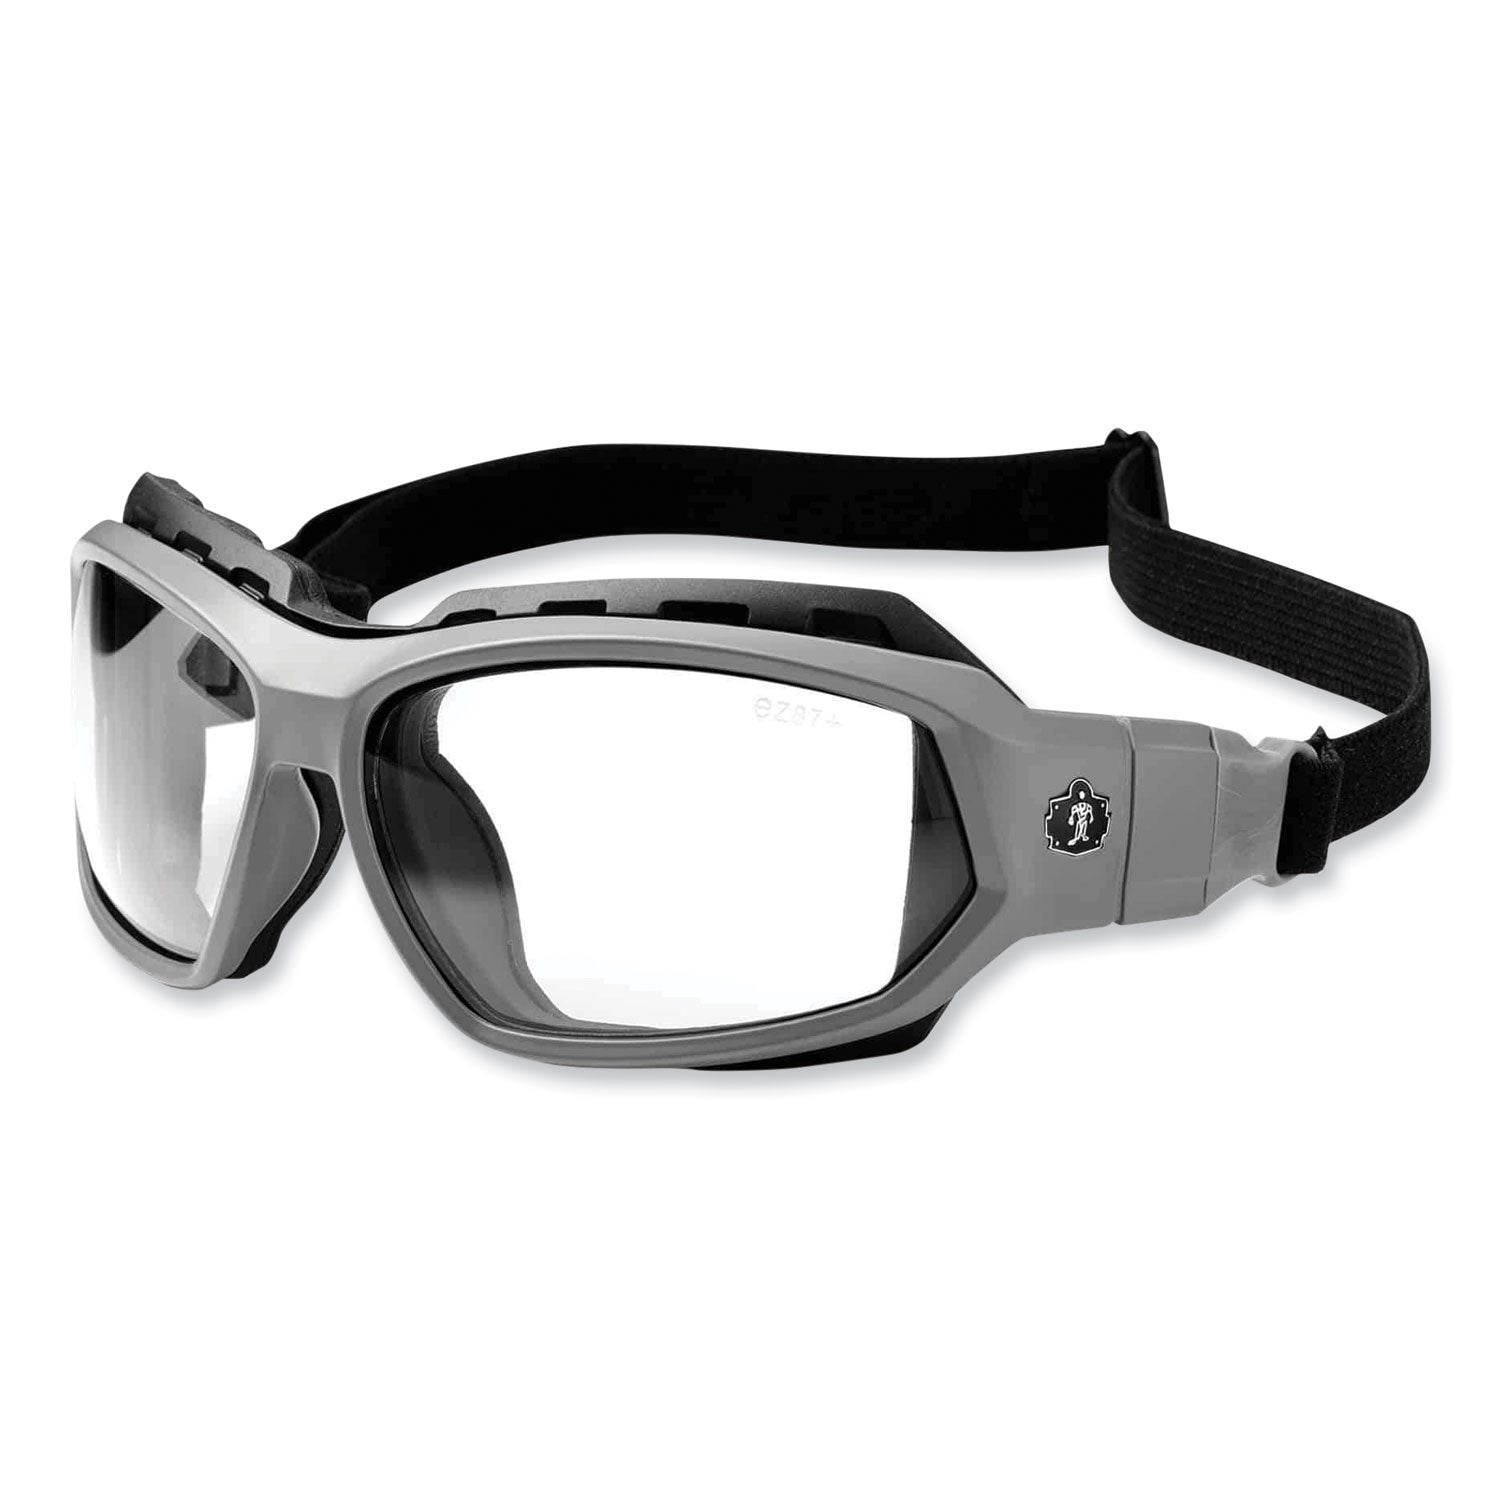 skullerz-loki-safety-glasses-goggles-matte-gray-nylon-impact-frame-anti-fog-clear-polycarb-lens-ships-in-1-3-business-days_ego56103 - 6